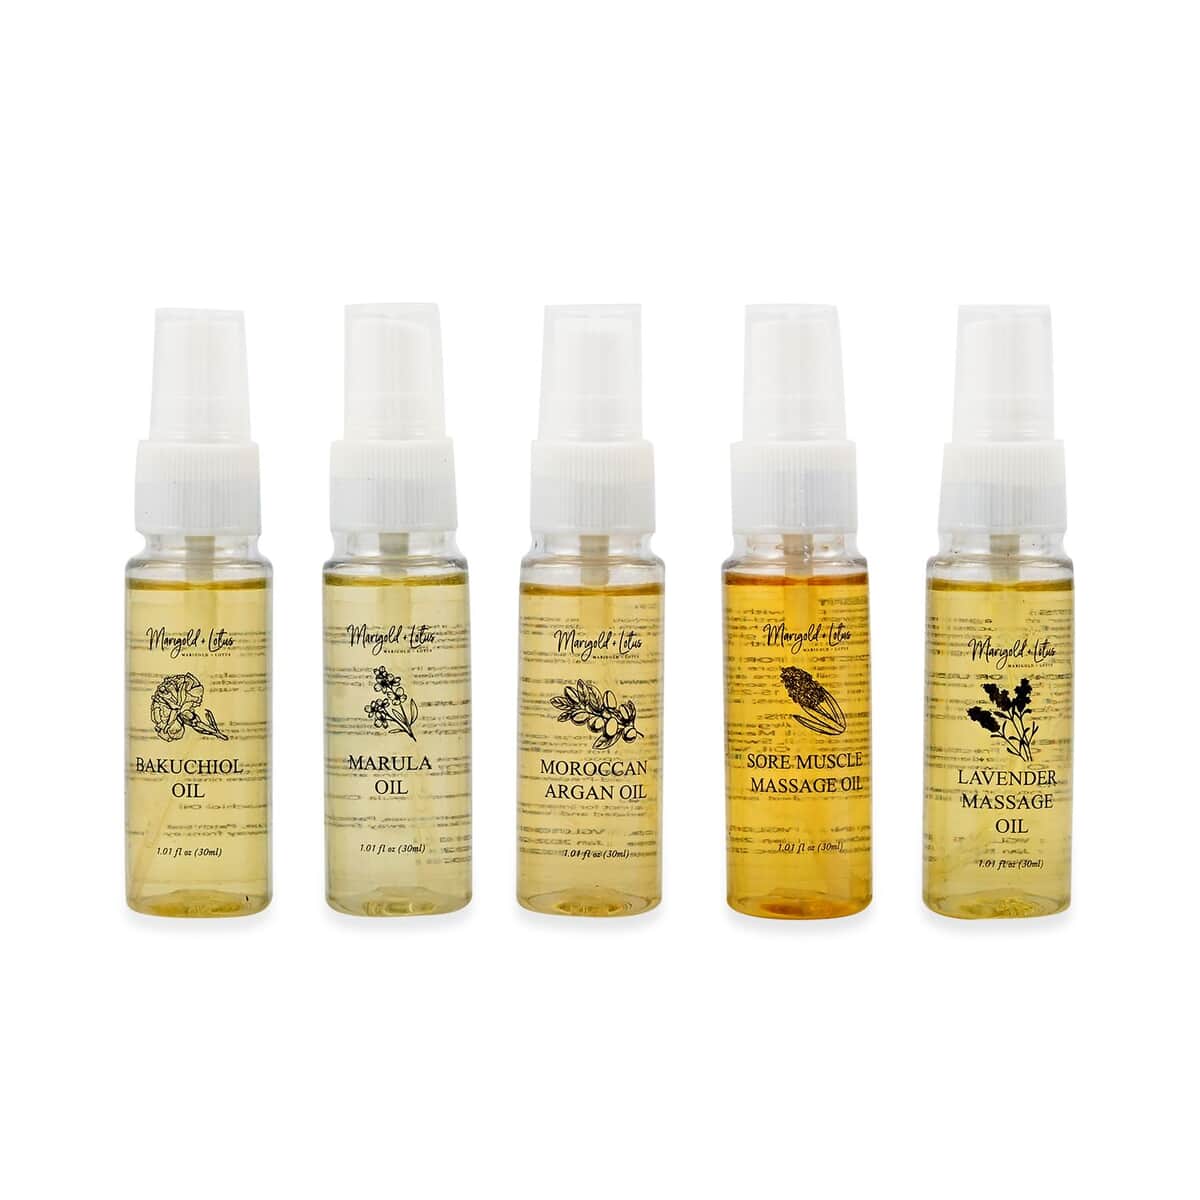 4th July Preview Deals Set of 5 Oils- Travel Edition, 2 of The Muscle Pain Relief Oils, 1 Marula, 1 Argan and 1 Bakuchi Oil (30 ml Each) Spray Bottles image number 0